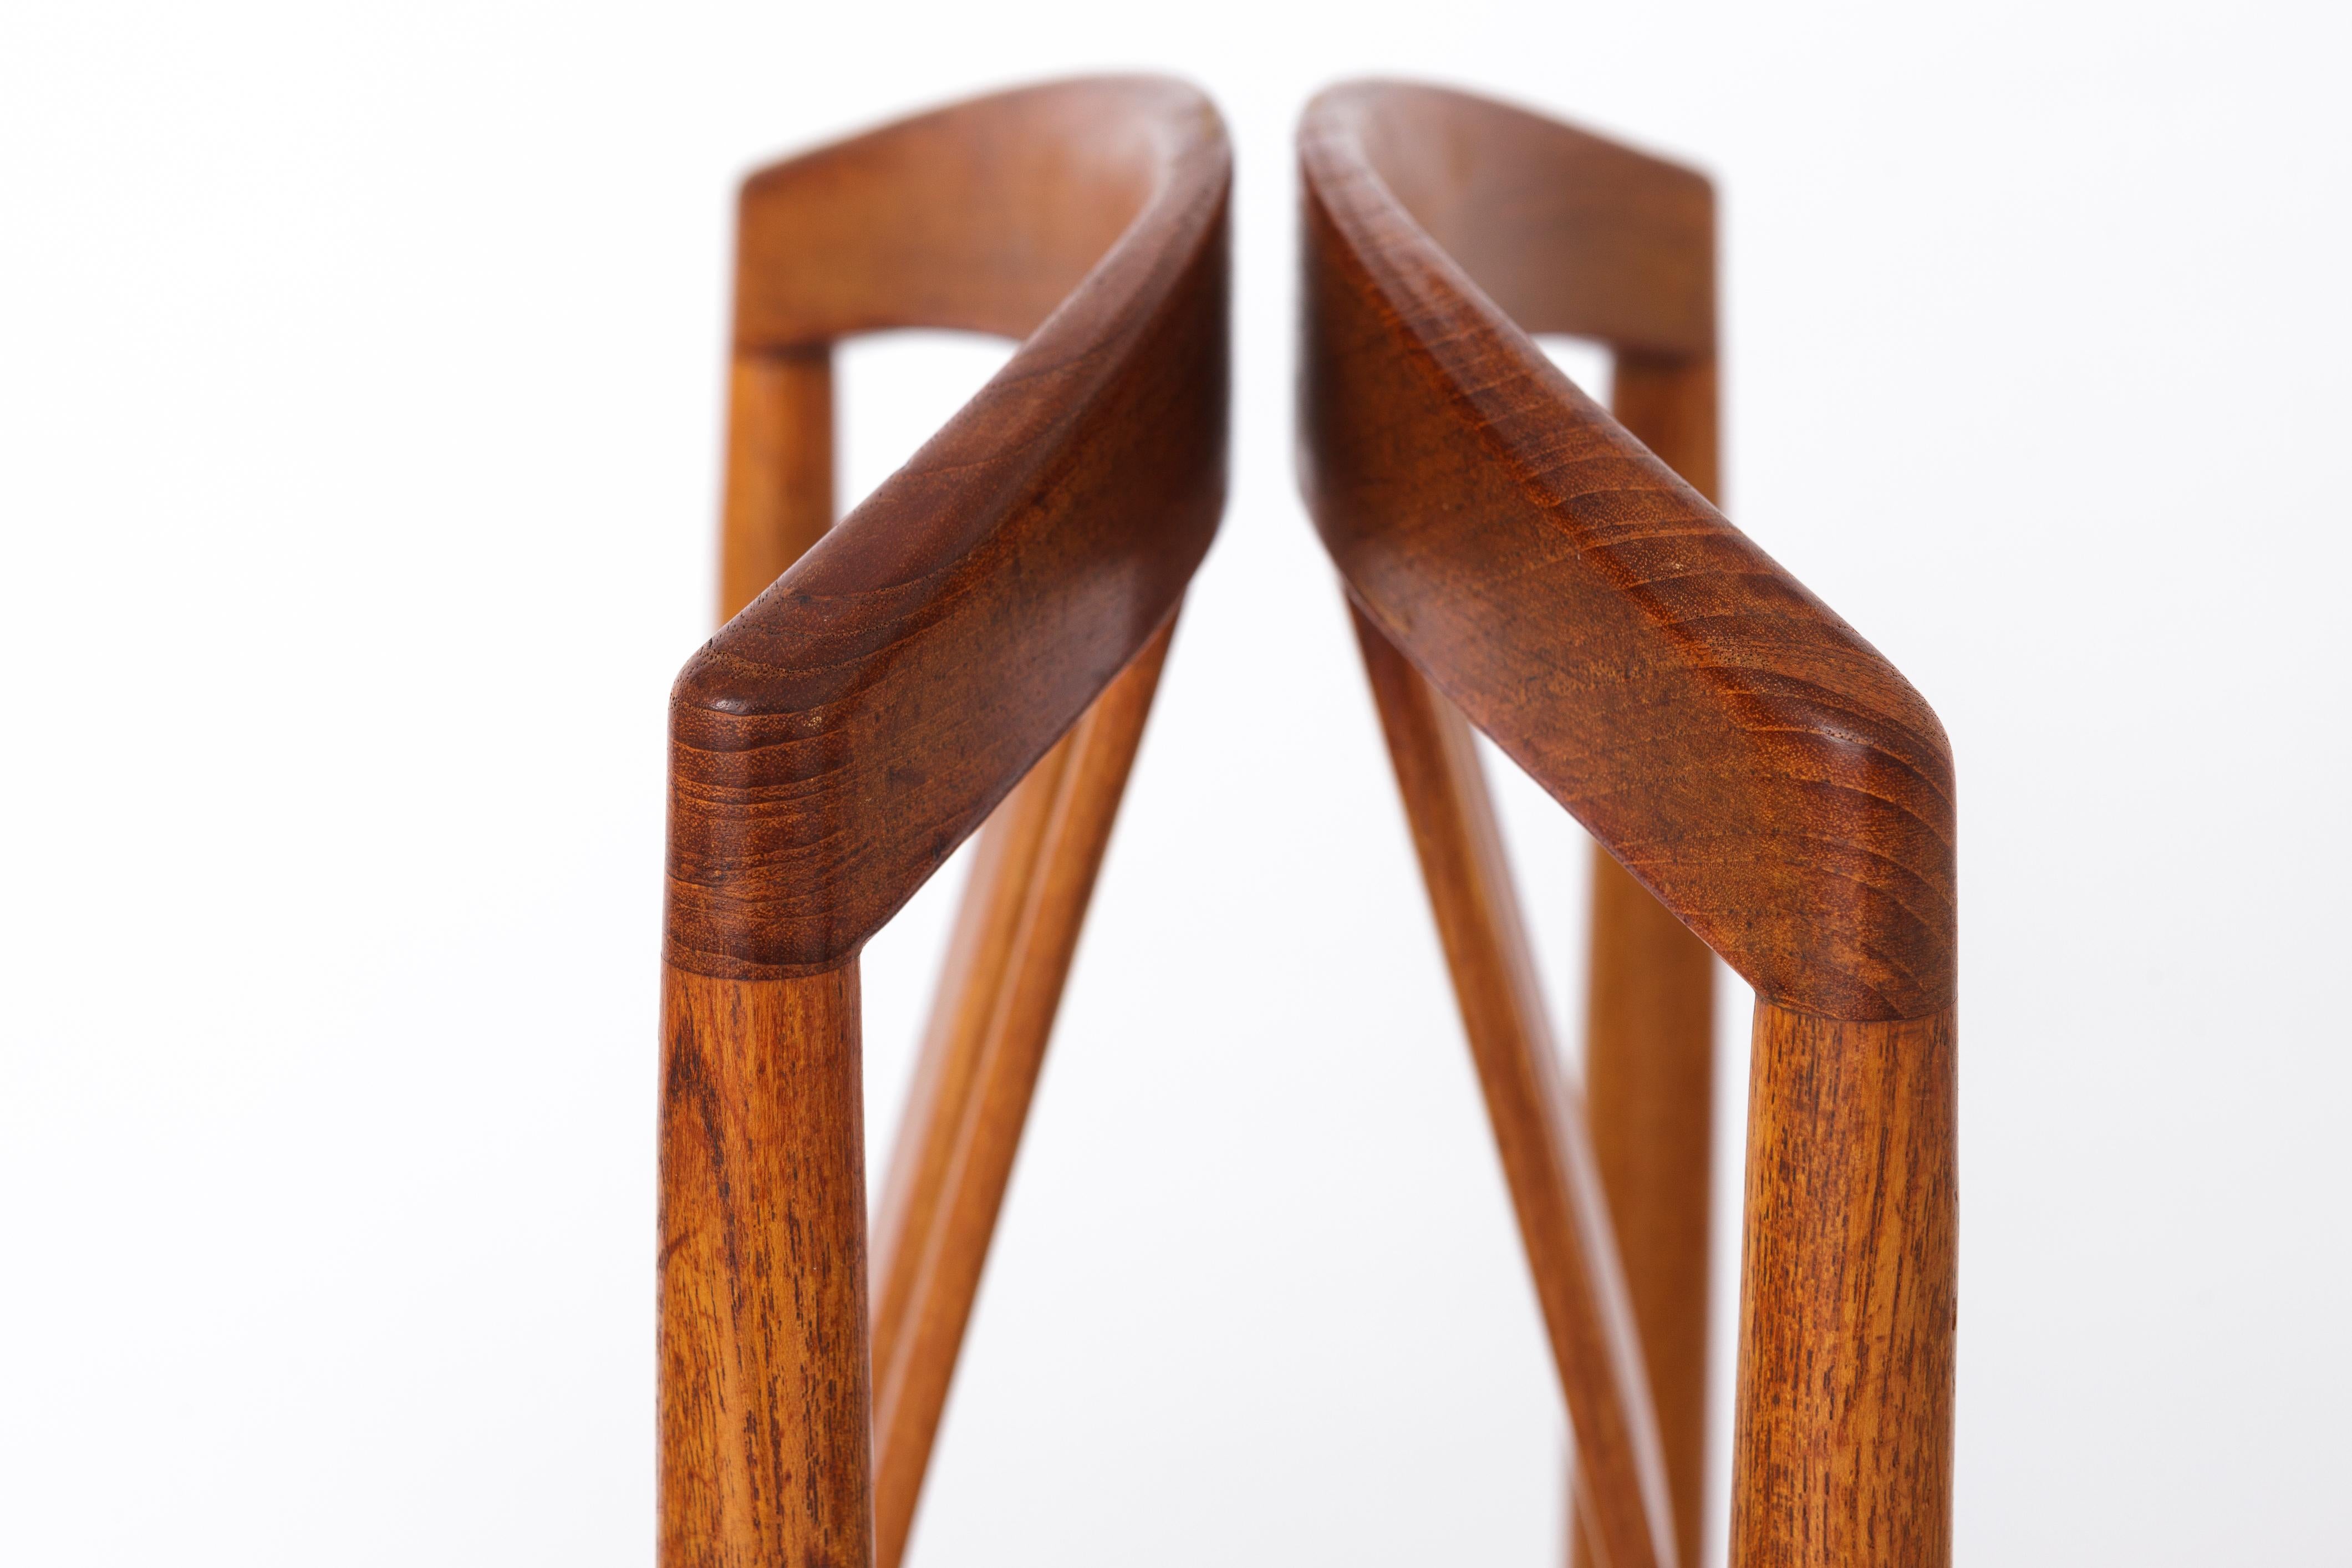 2 of 4 Chairs by Carl Ekström for Albin Johansson & Söner, Sweden, 1960s - Set o In Good Condition For Sale In Hannover, DE